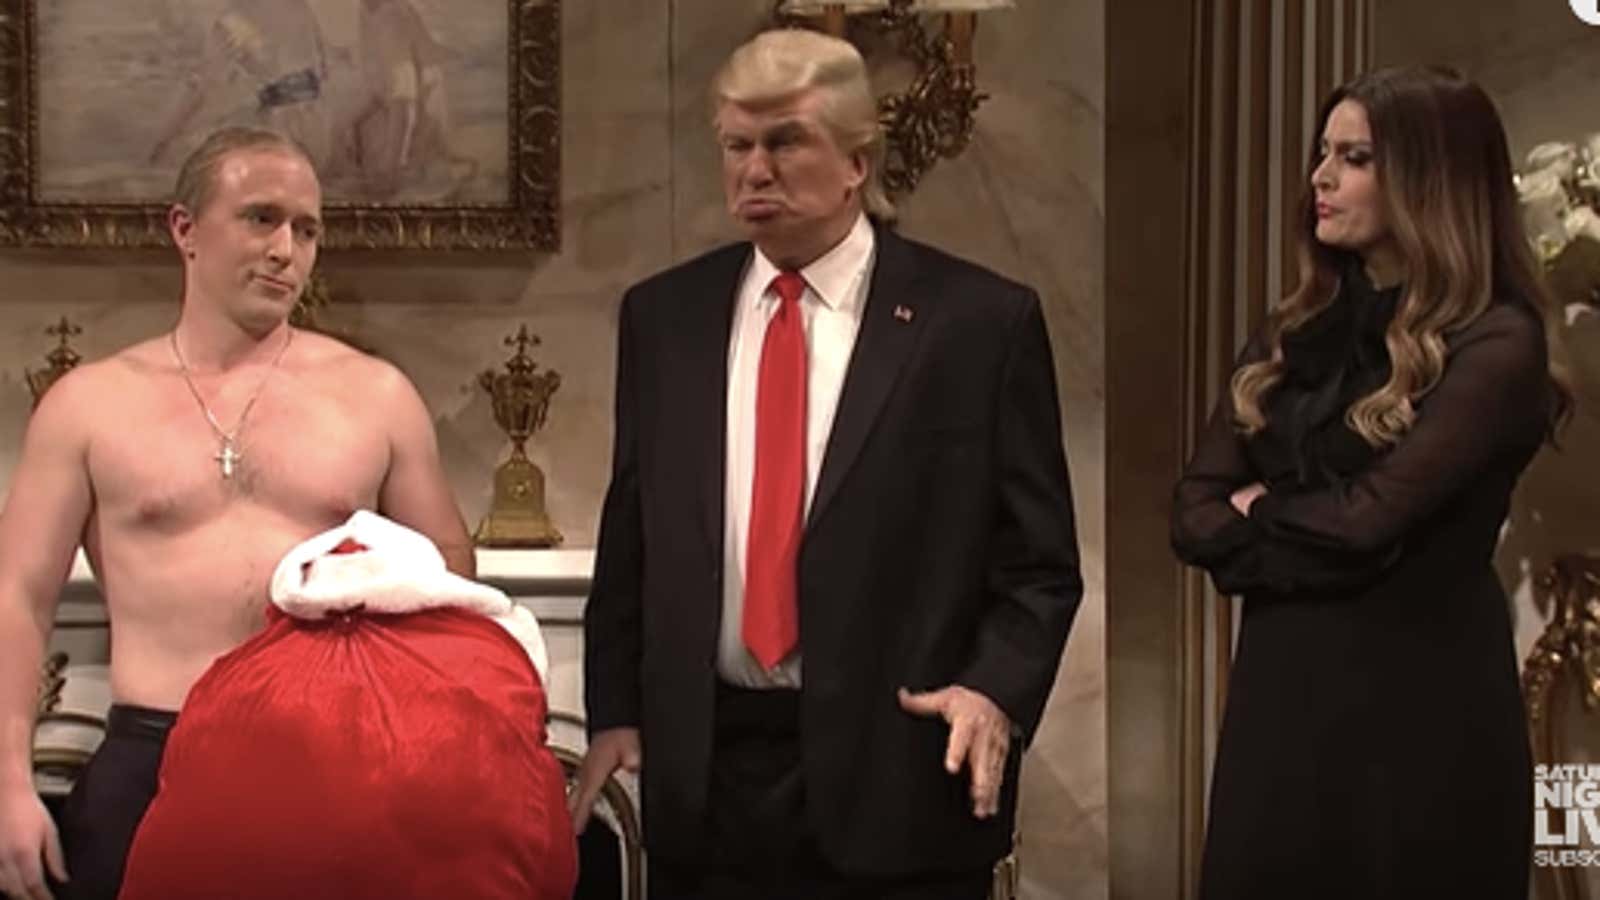 It’s Christmas at Trump Tower, and “Saturday Night Live” has loads of gifts in its bag